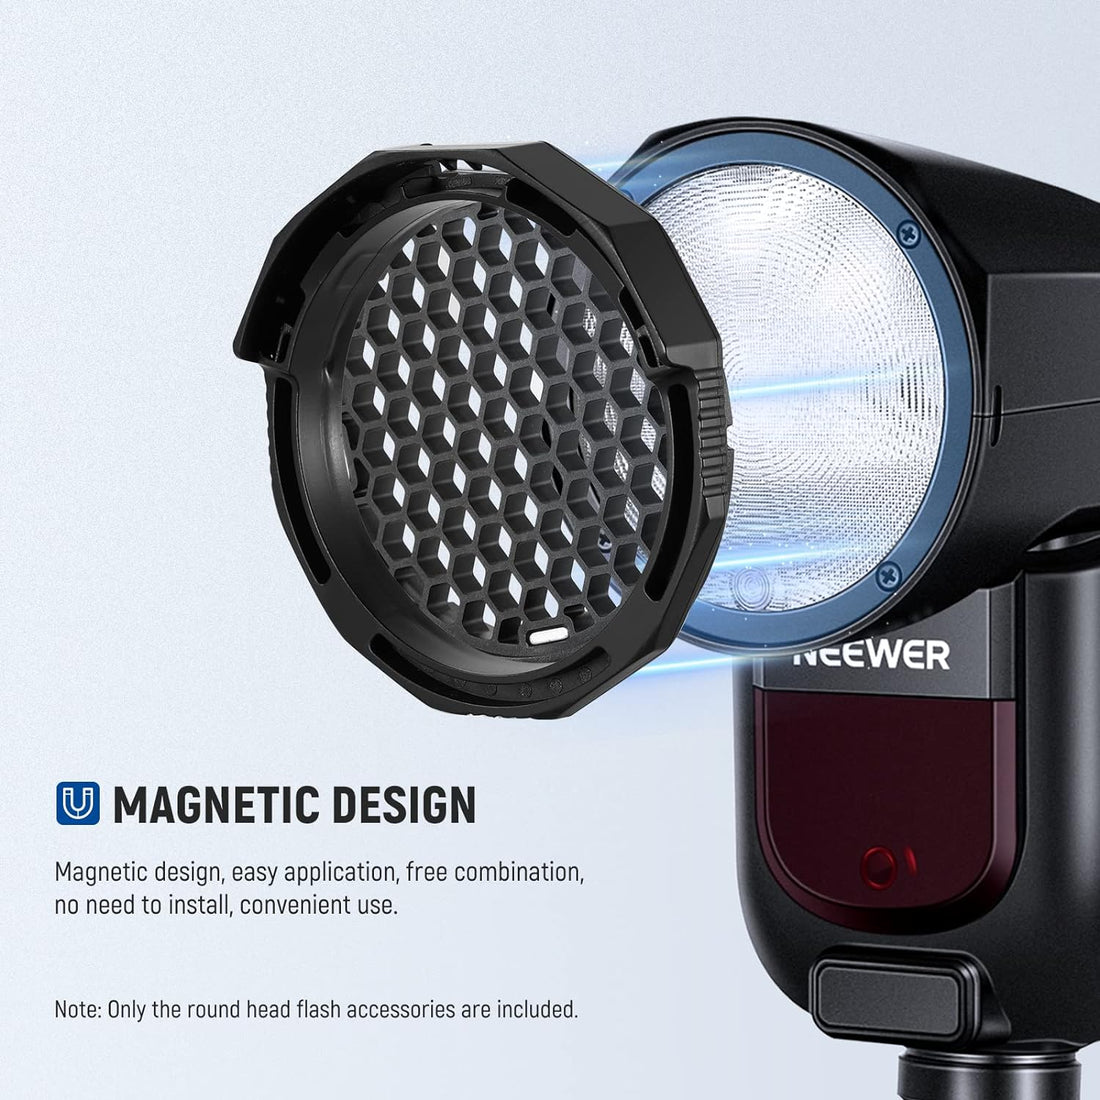 NEEWER Z1 Round Head Flash Accessories Kit for Z1-S, Z1-N, Z1-C Speedlite, Includes Barndoor, Honeycomb Grid, Gel Color Filters, Dome Diffuser, Diffuser Panel, Bounce Diffuser, Carrying Bag, GM-M1